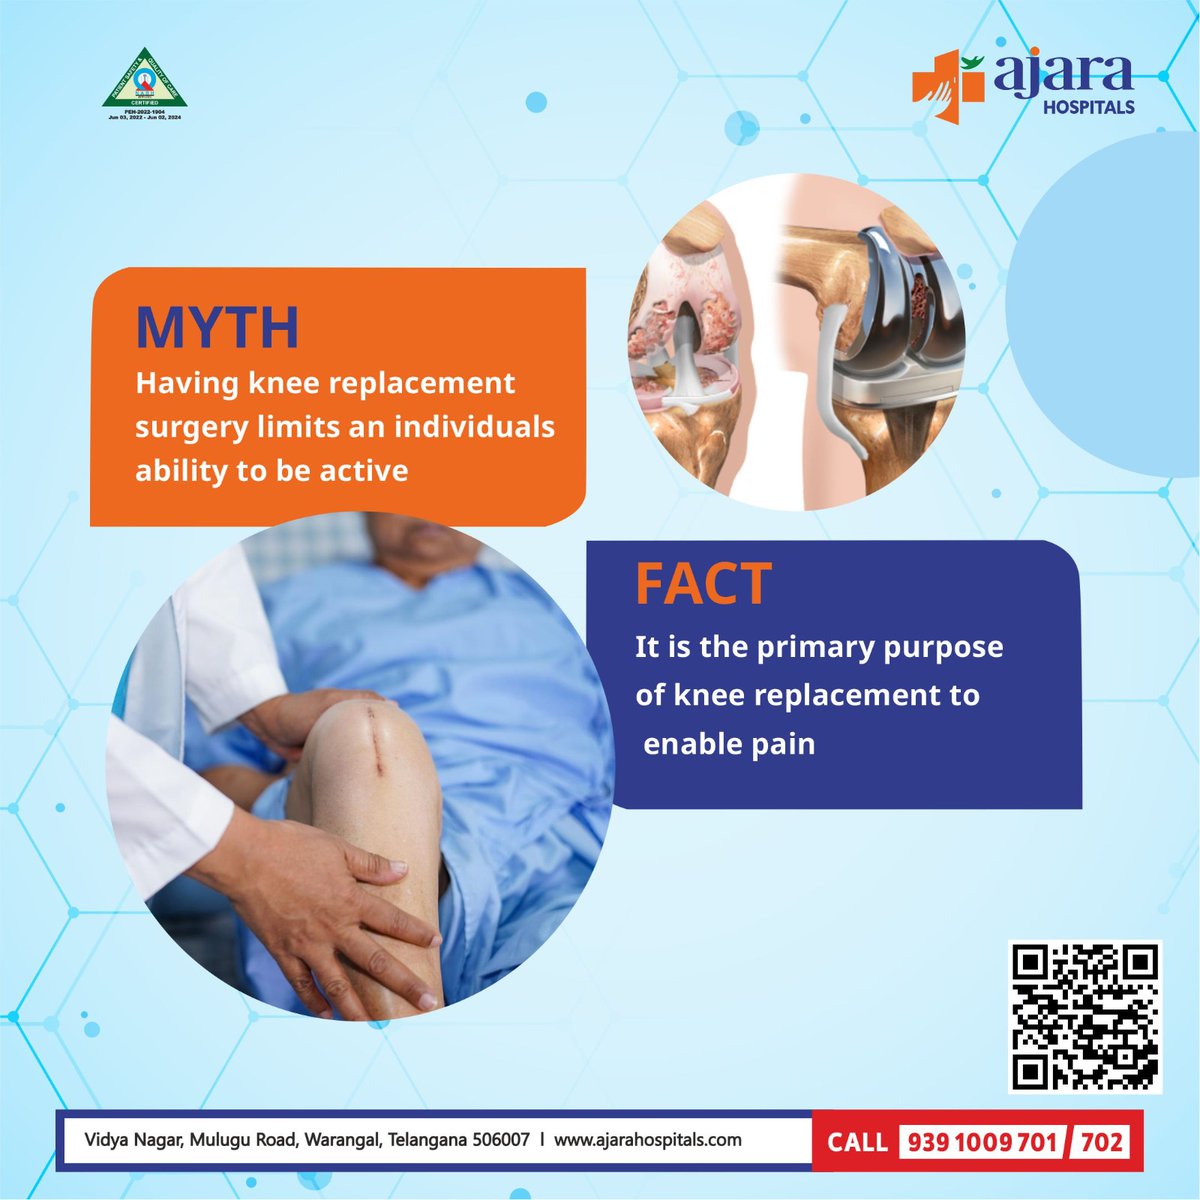 Separate myth from fact about knee replacement surgery at Ajara Hospital.Don't let myths hold you back from seeking relief. Trust Ajara Hospital for expert care.
#FactsVsMyths #TruthMatters #MythVsReality #KnowTheFacts #myth #facts #KneeReplacementSurgeon  #Ajarahospitals